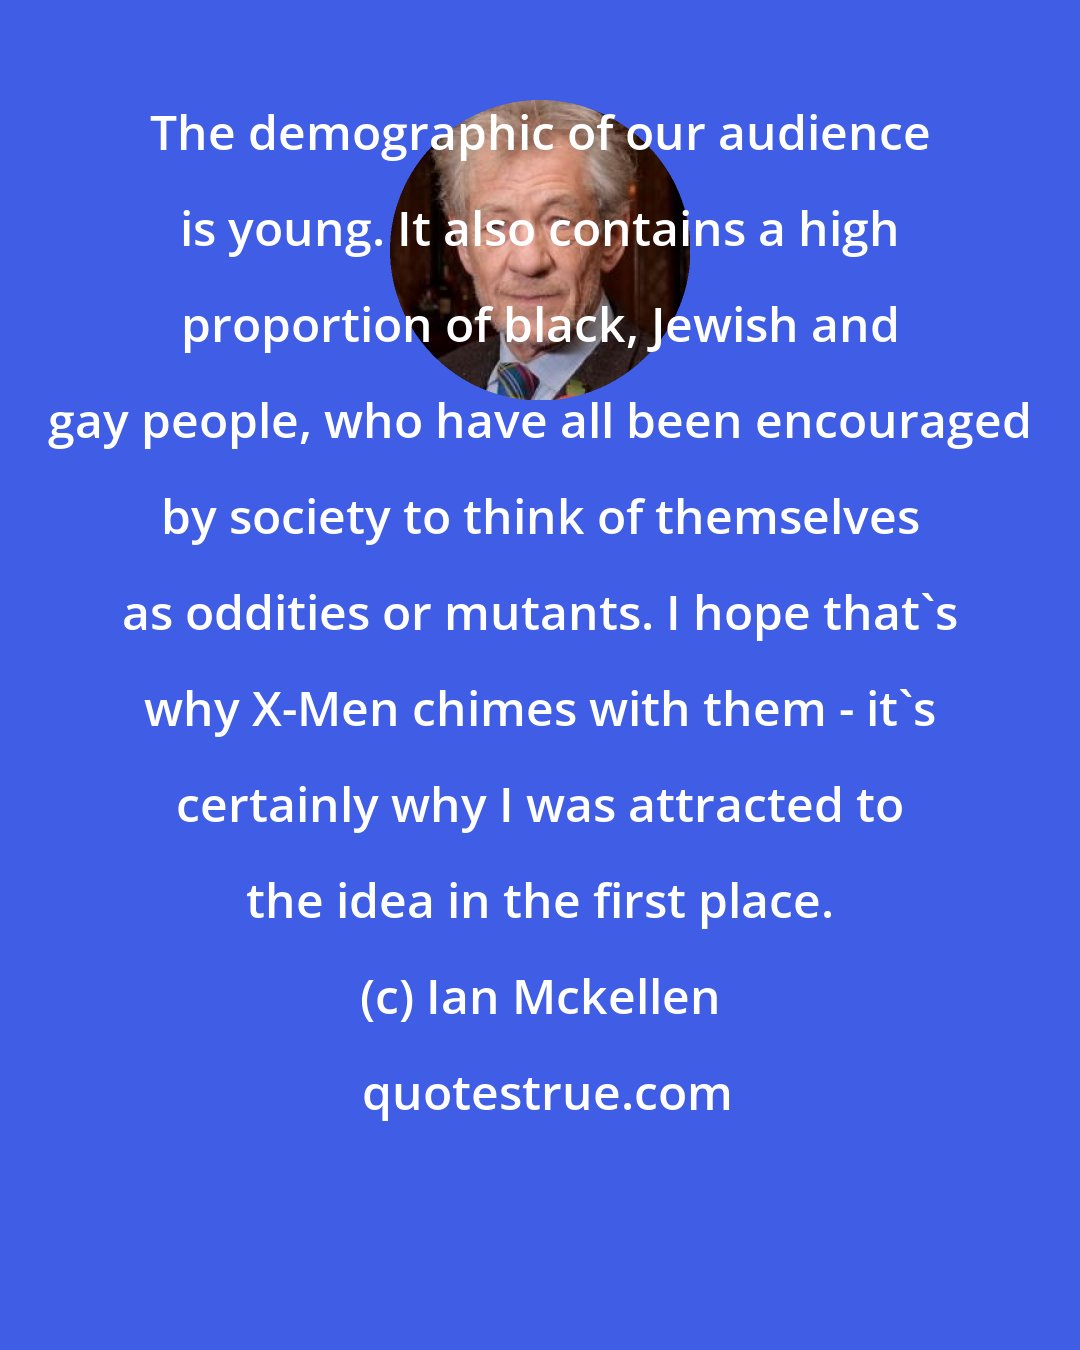 Ian Mckellen: The demographic of our audience is young. It also contains a high proportion of black, Jewish and gay people, who have all been encouraged by society to think of themselves as oddities or mutants. I hope that's why X-Men chimes with them - it's certainly why I was attracted to the idea in the first place.